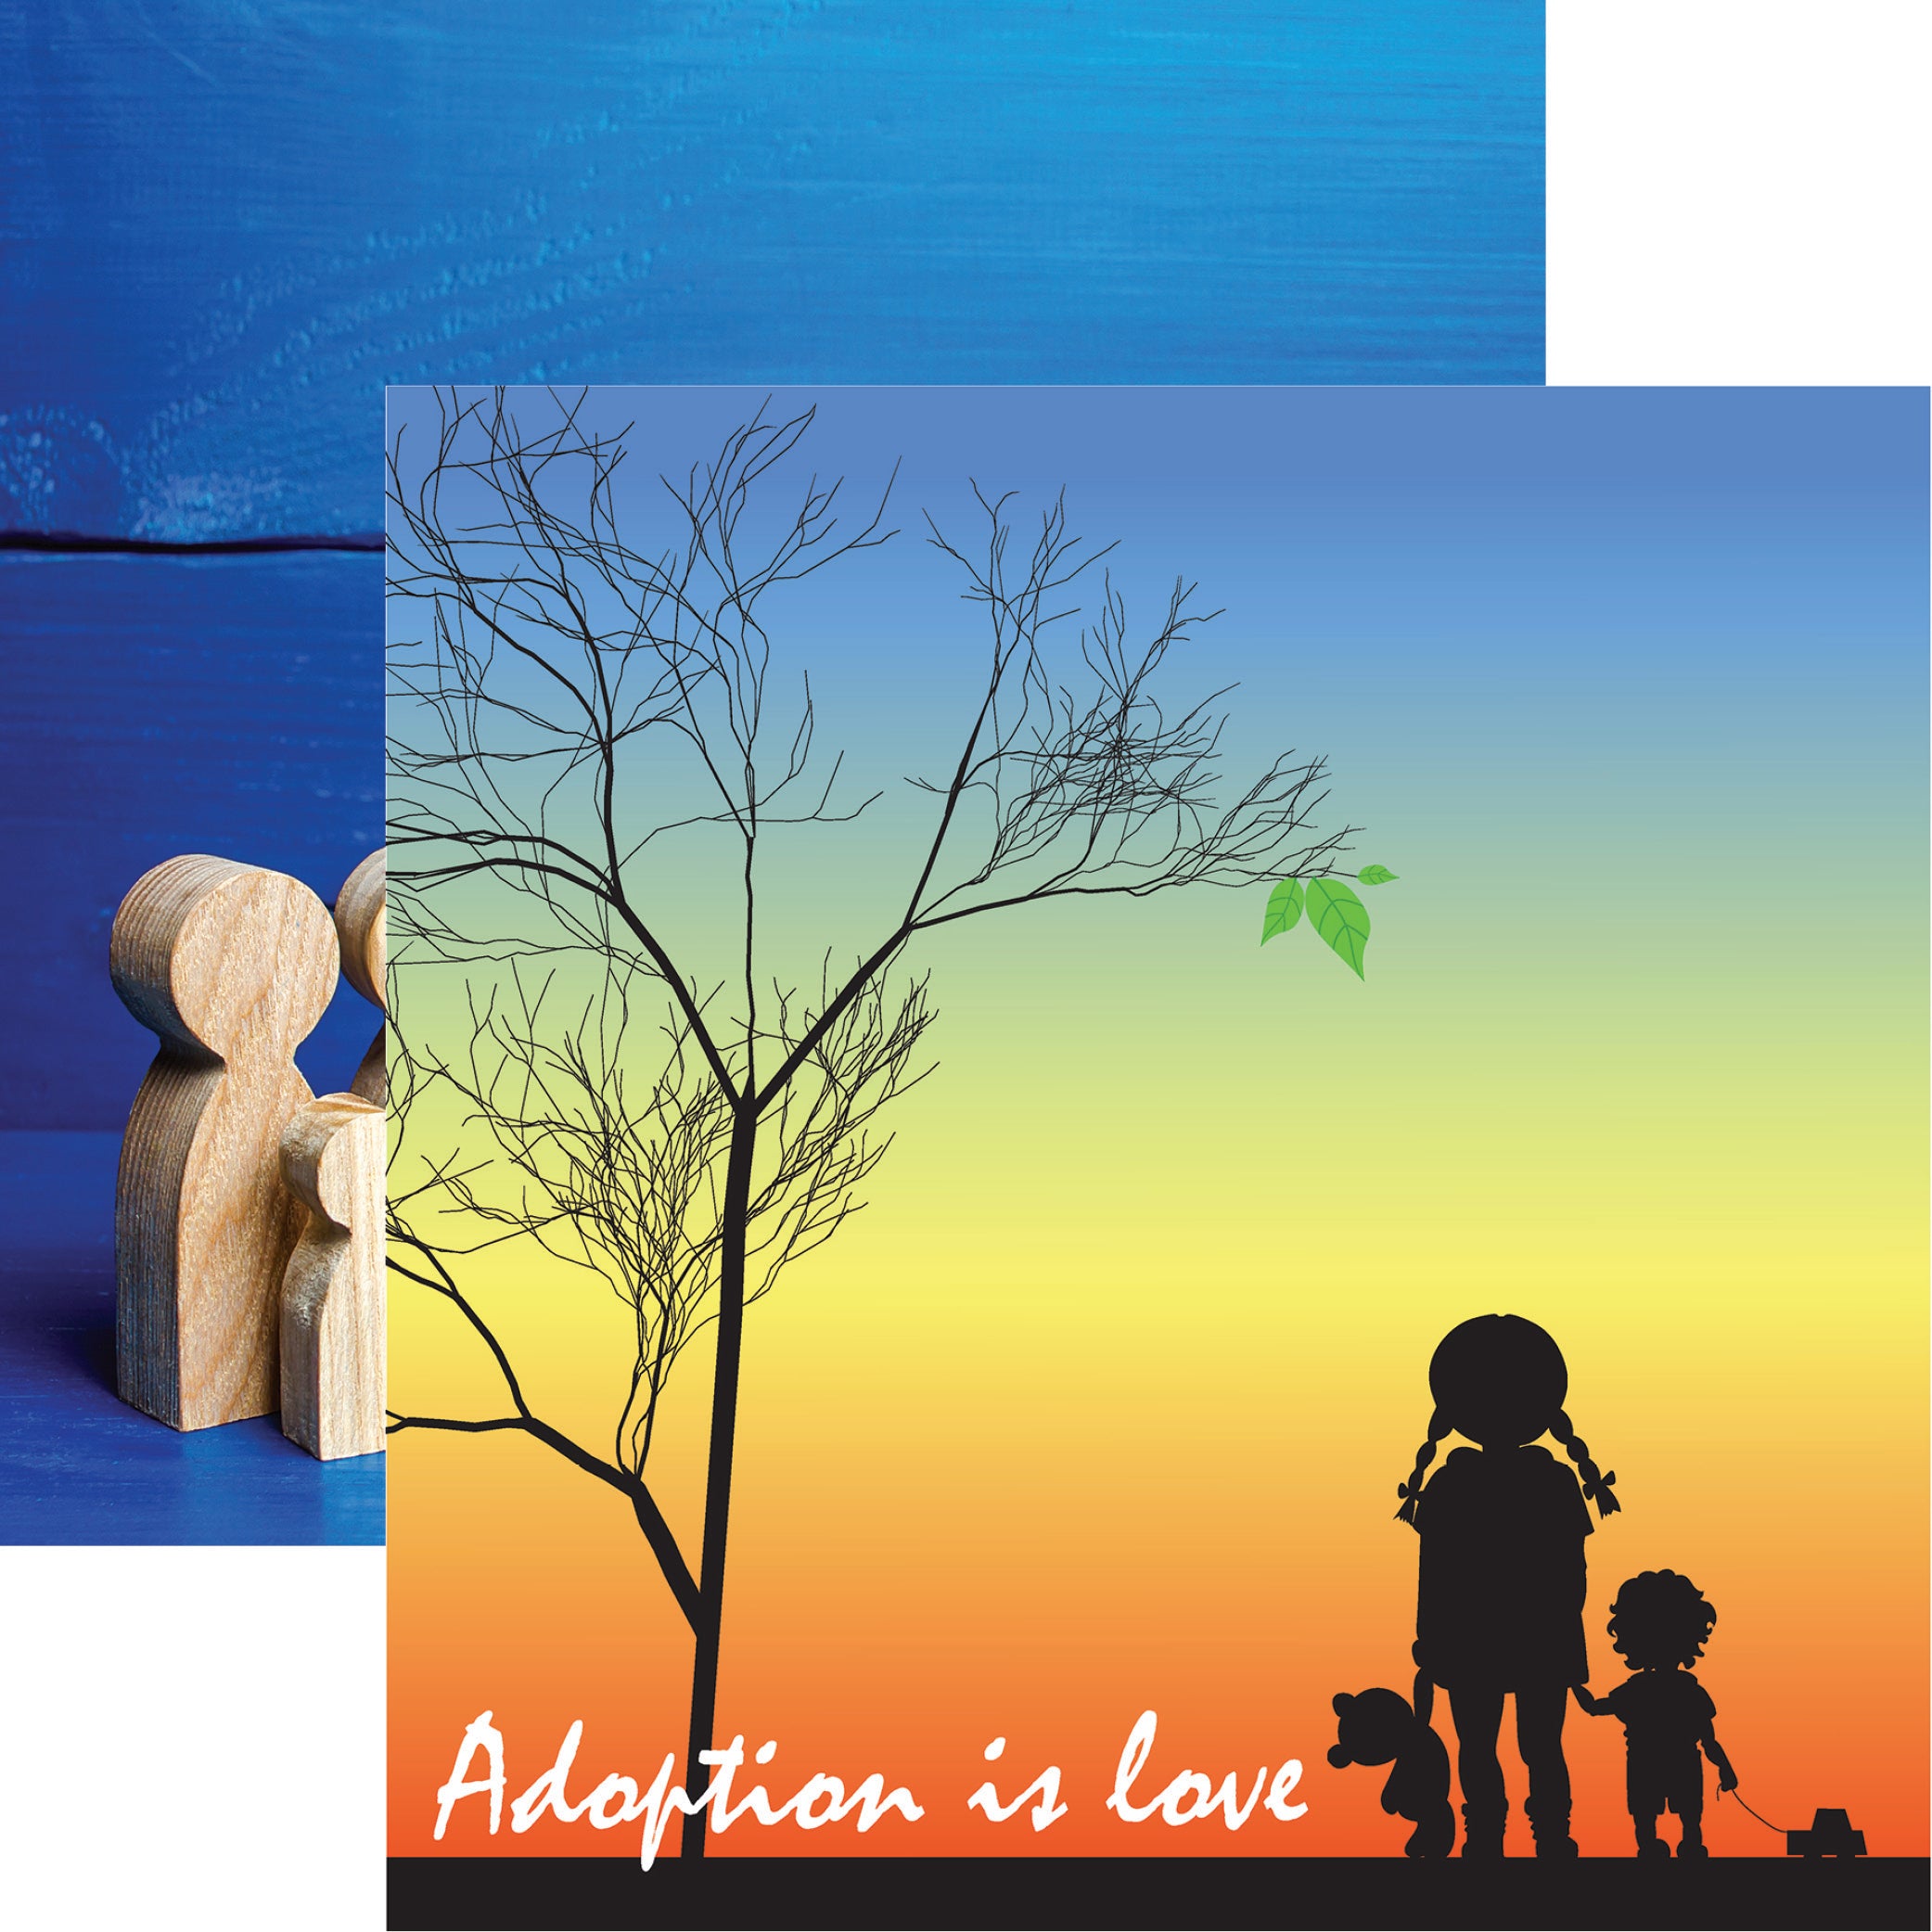 Love Makes a Family Adoption 12x12 Scrapbooking Stickers – Country